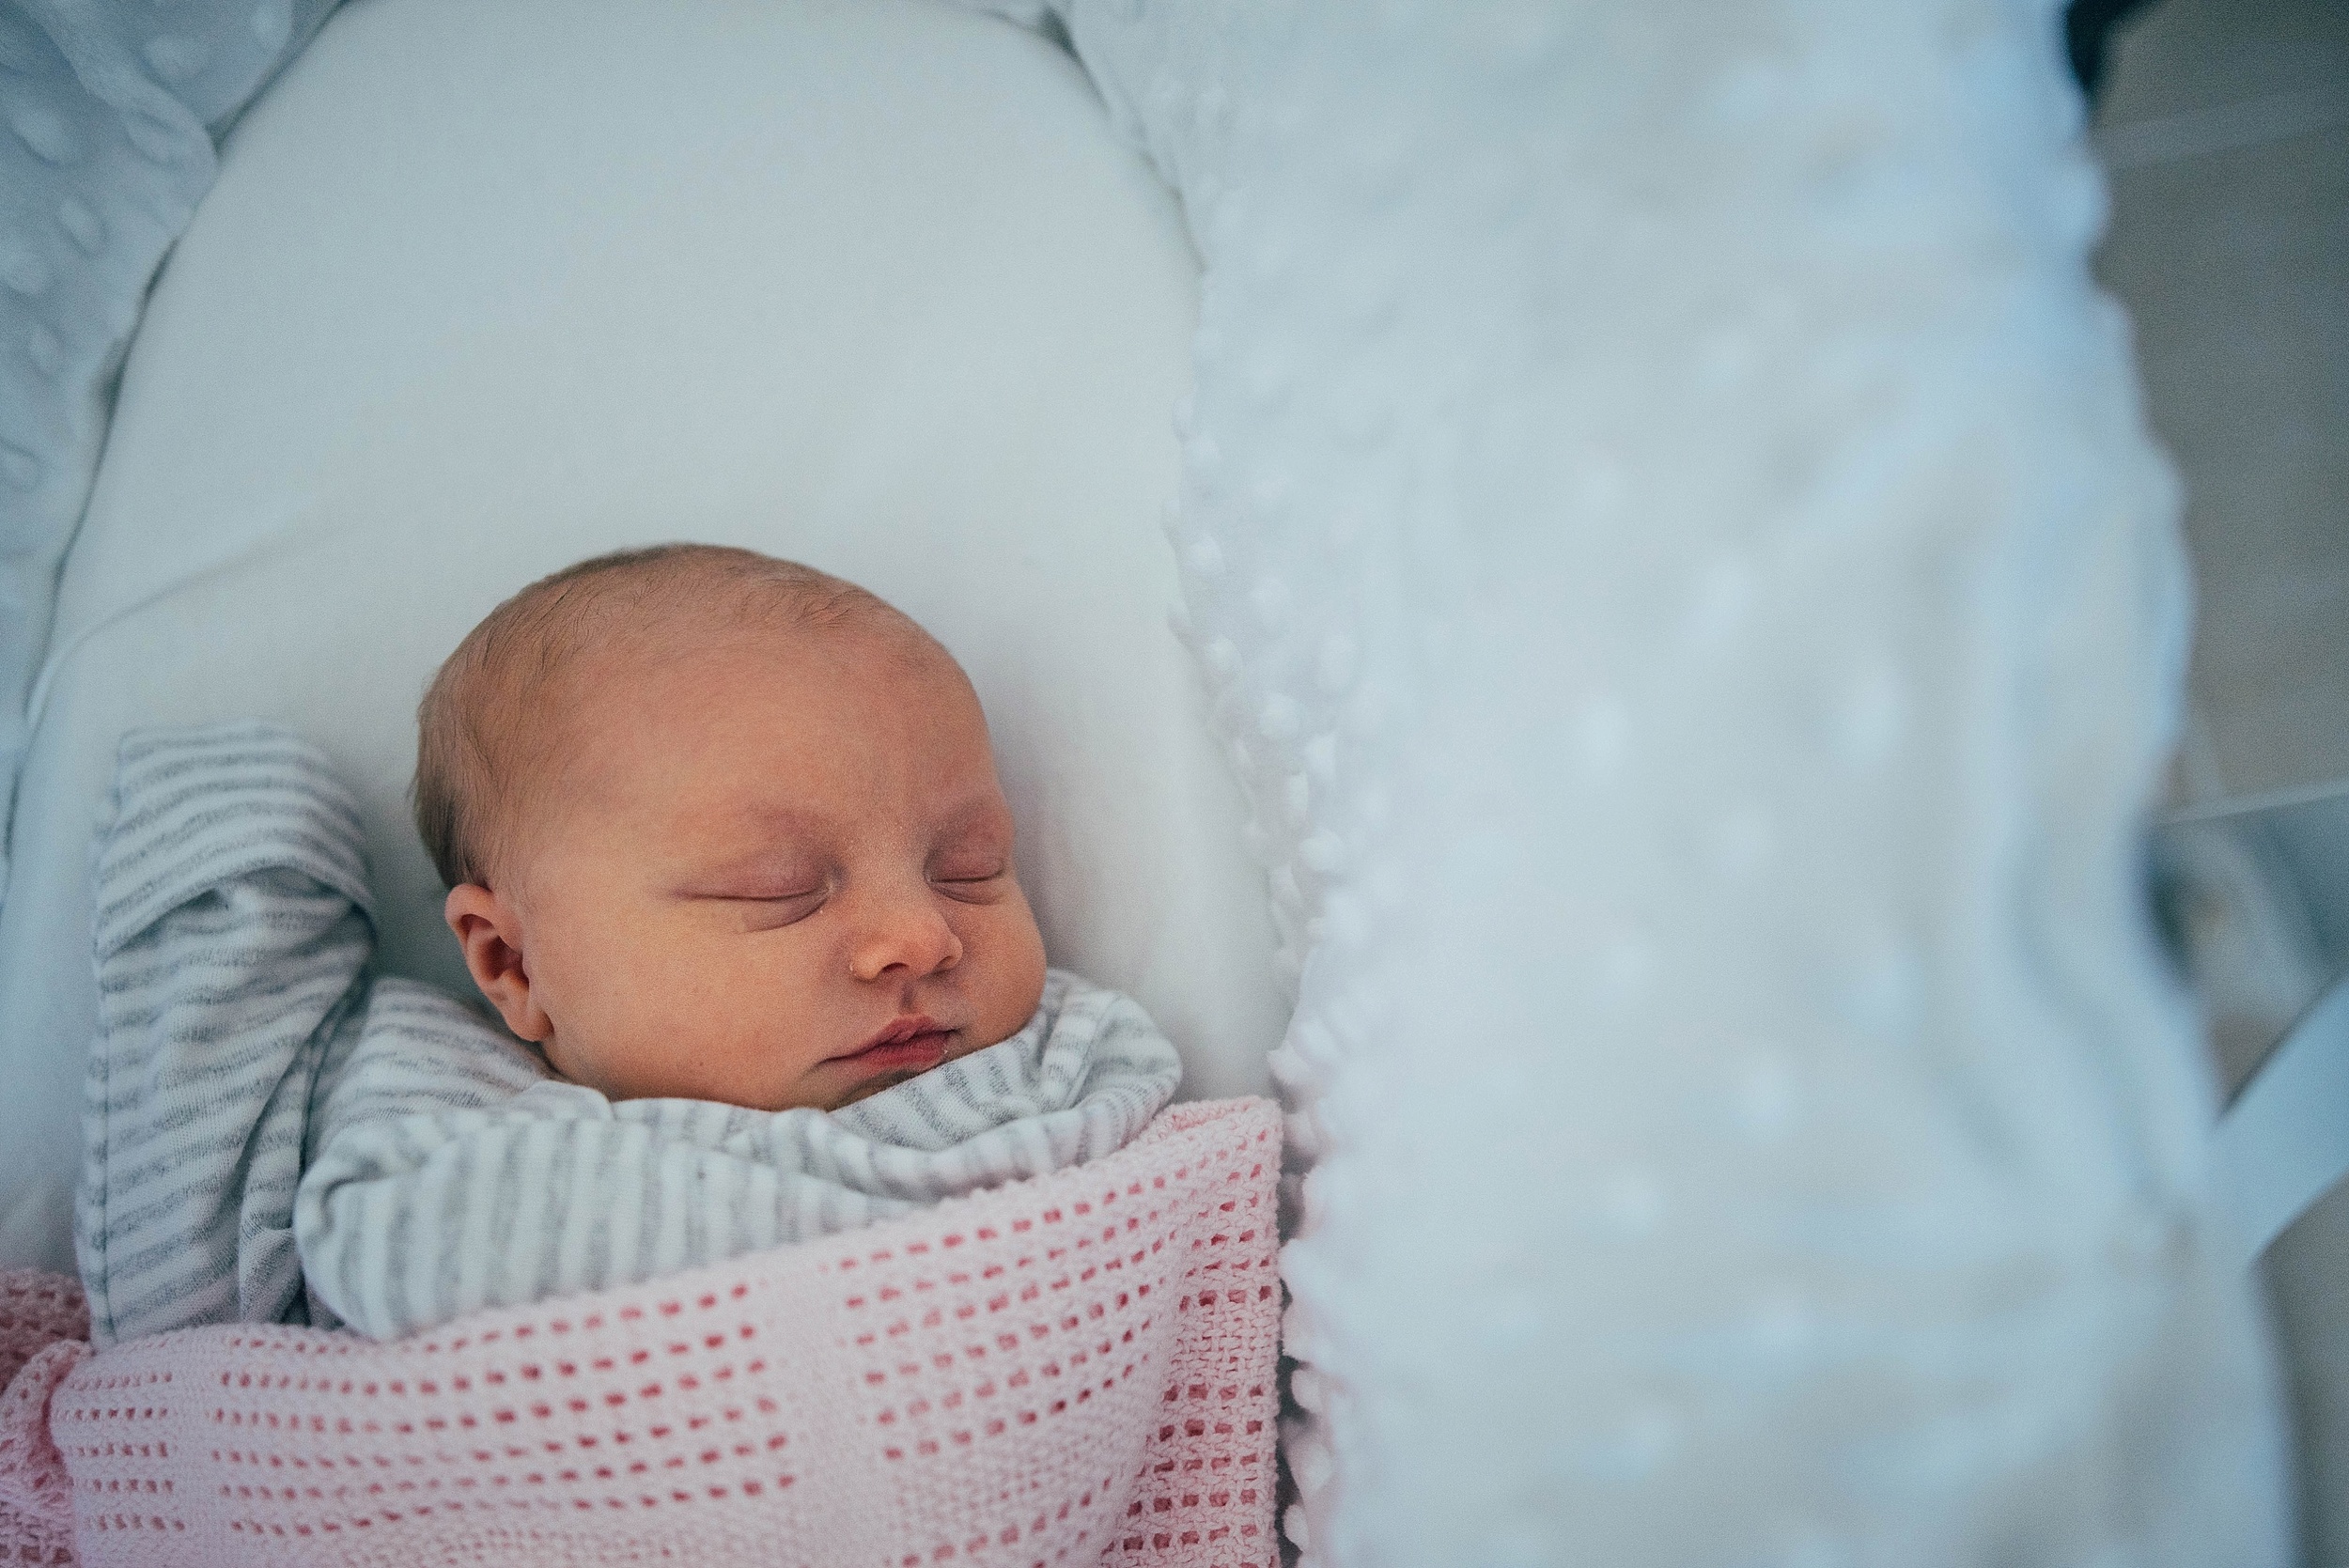 At Home Lifestyle Shoot with Newborn baby Essex UK Documentary Portrait Lifestyle Photographer